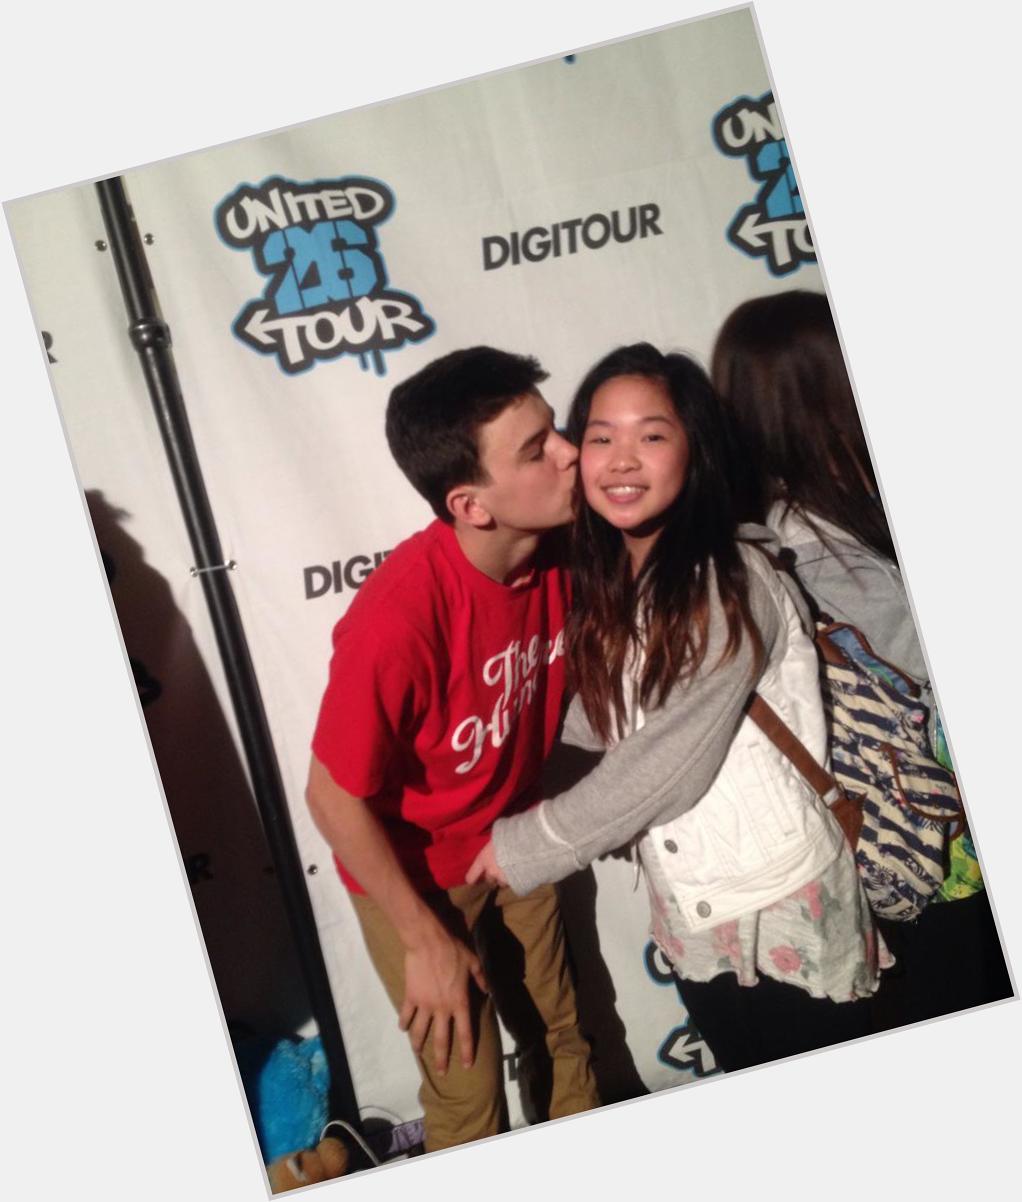 HAPPY 15th BIRTHDAY MR HAYES GRIER! HAD A BLAST MEETING YOU AND I HOPE TO SEE YOU SOON! HAVE A GOOD ONE 